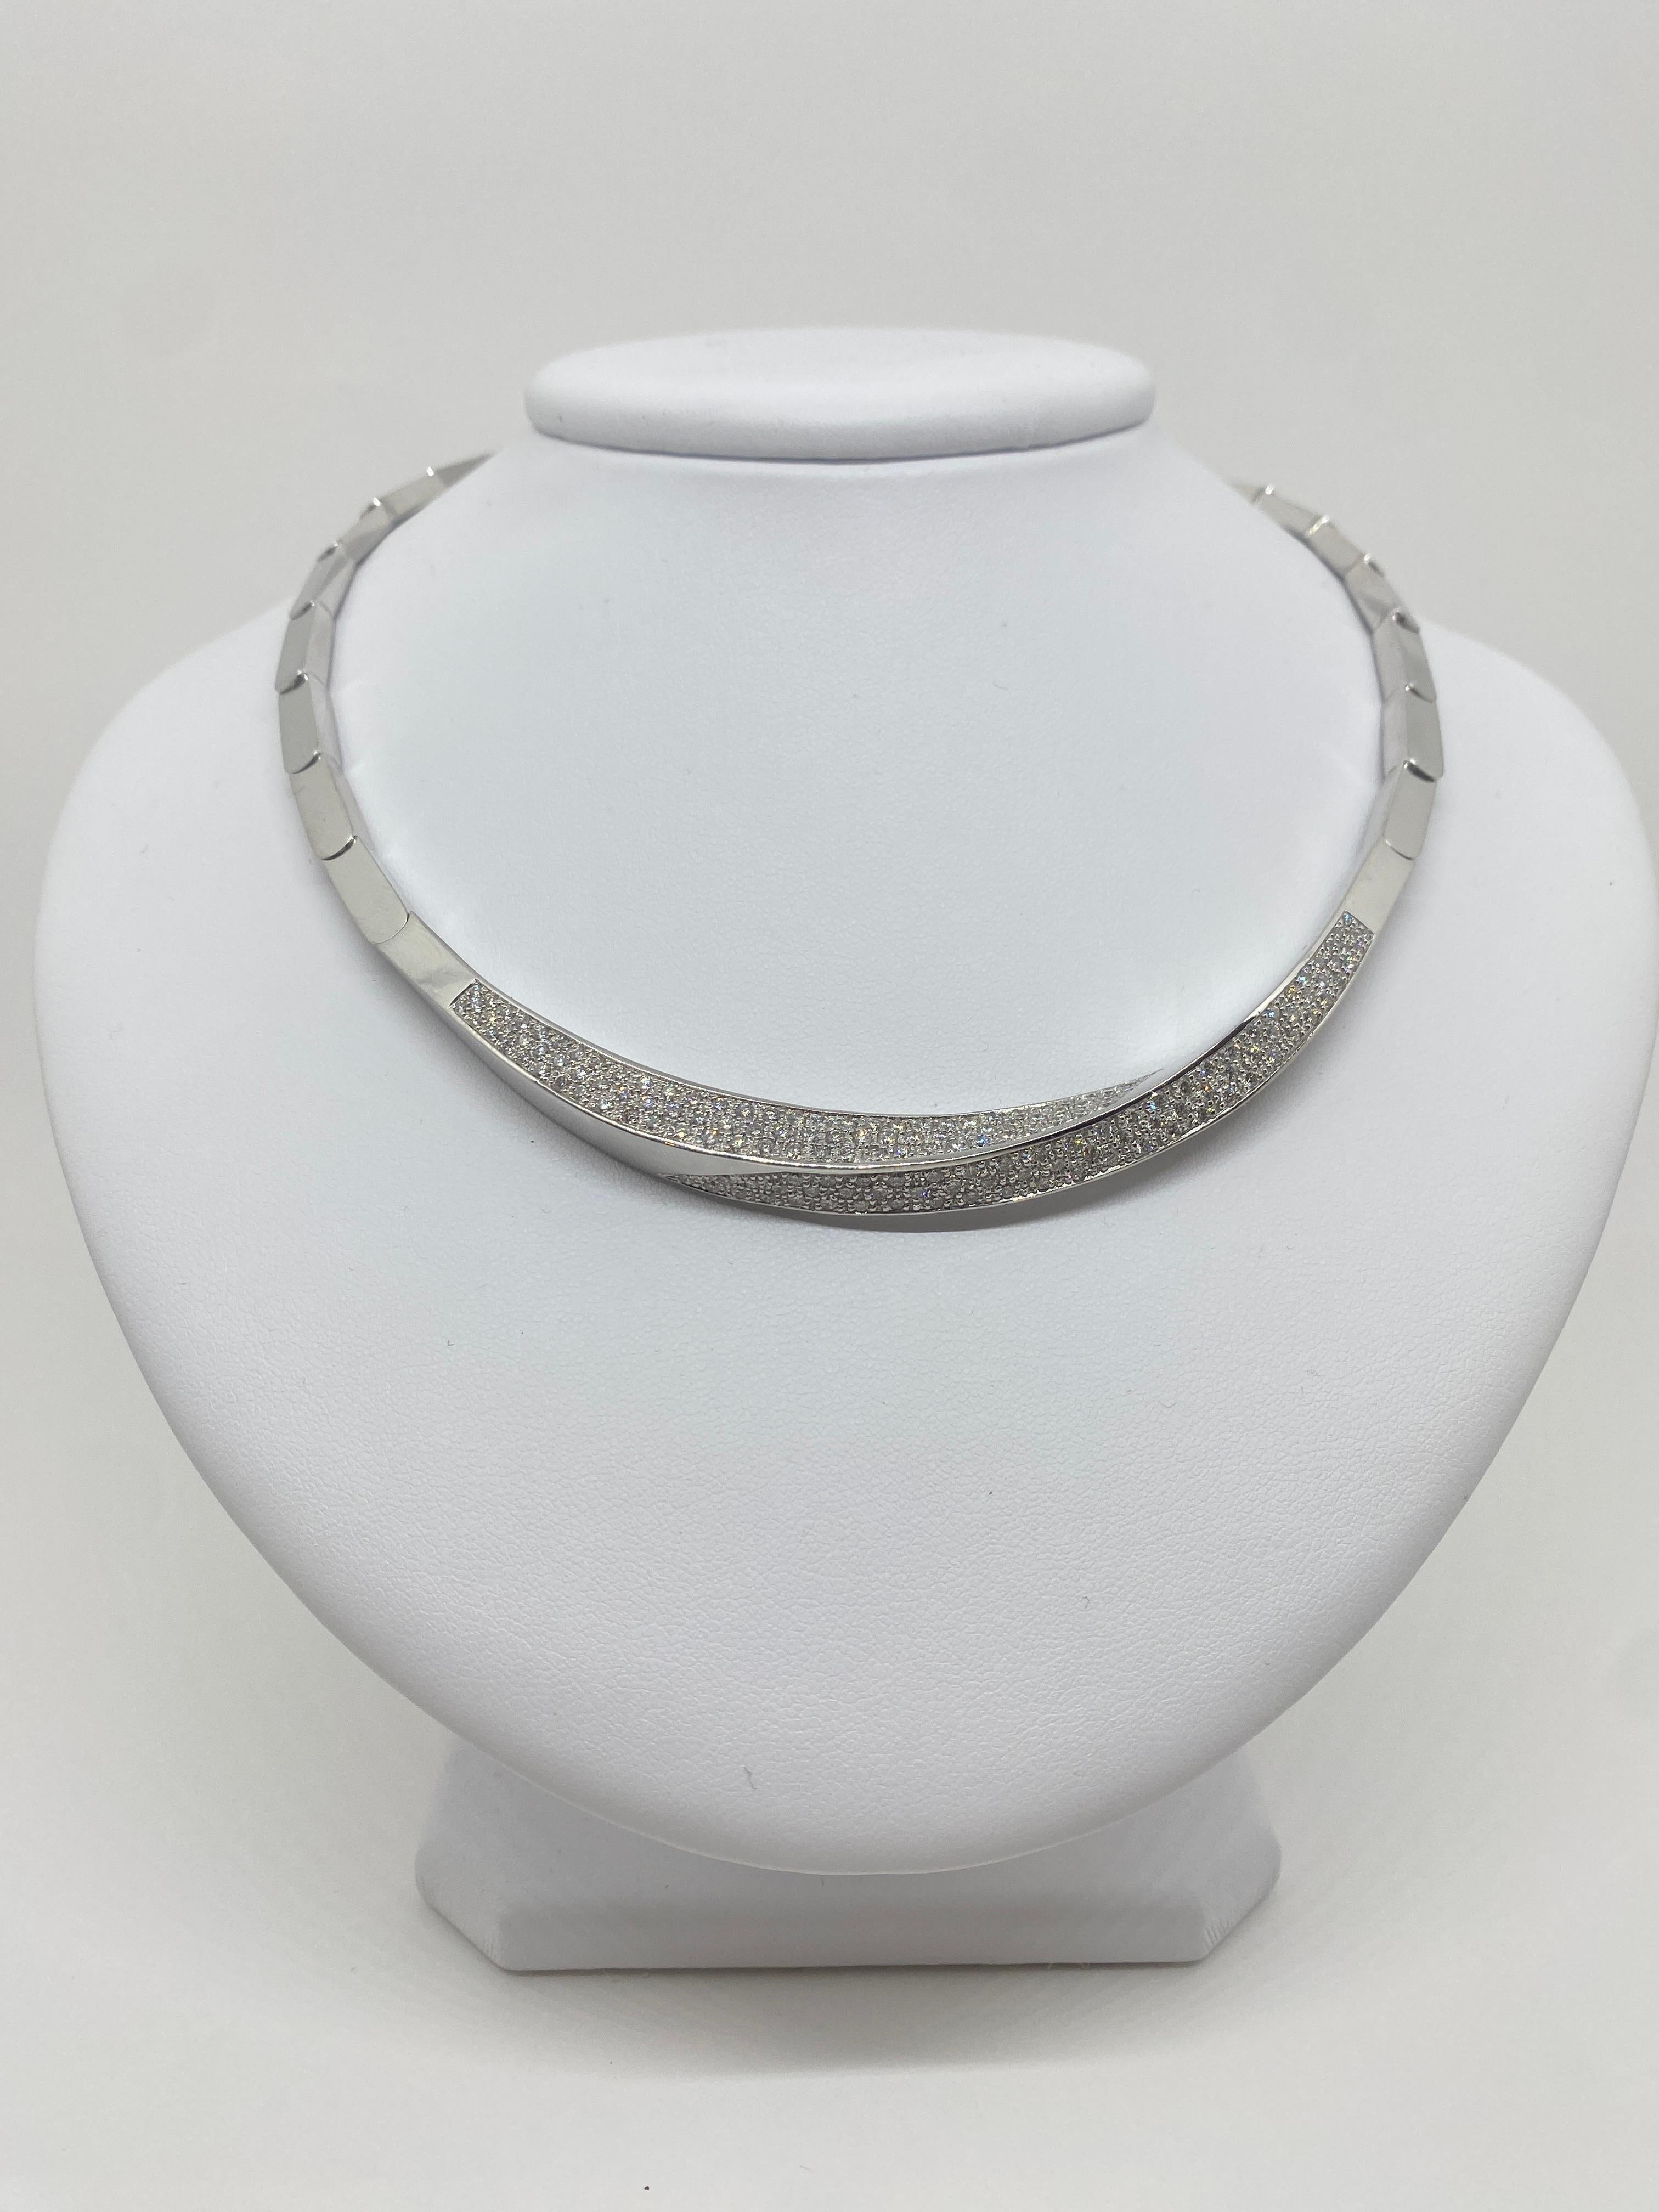 Beautifull Necklace made of 18kt white gold with natural brilliant-cut diamonds for ct 3.06

Welcome to our jewelry collection, where every piece tells a story of timeless elegance and unparalleled craftsmanship. As a family-run business in Italy